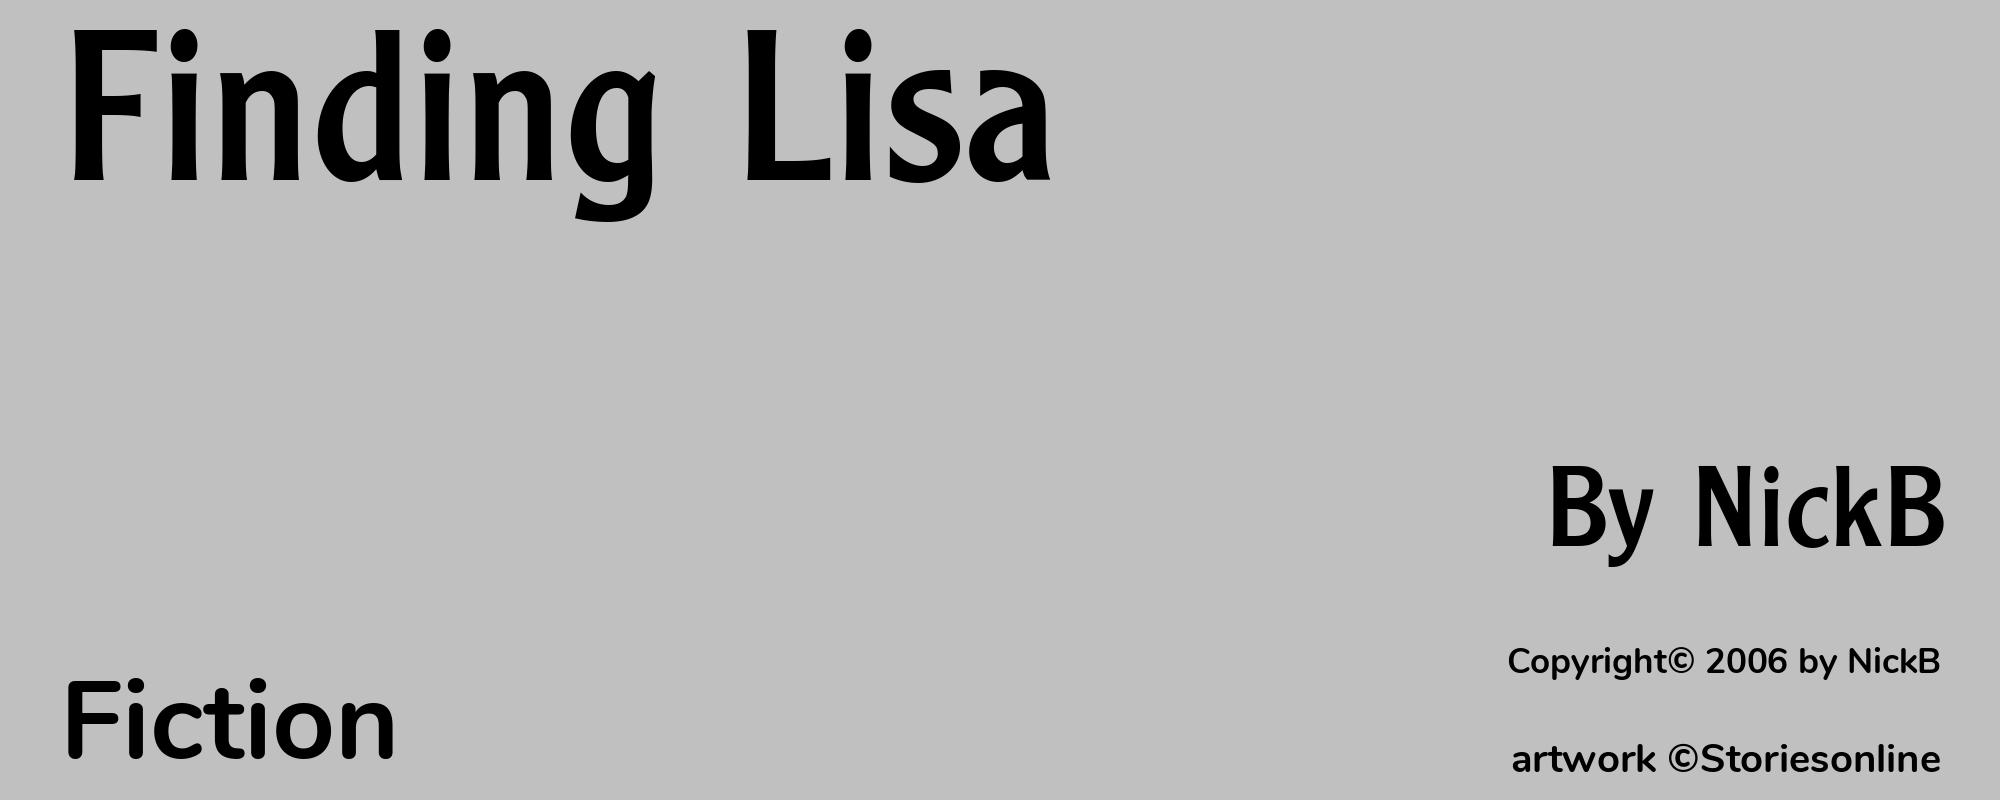 Finding Lisa - Cover